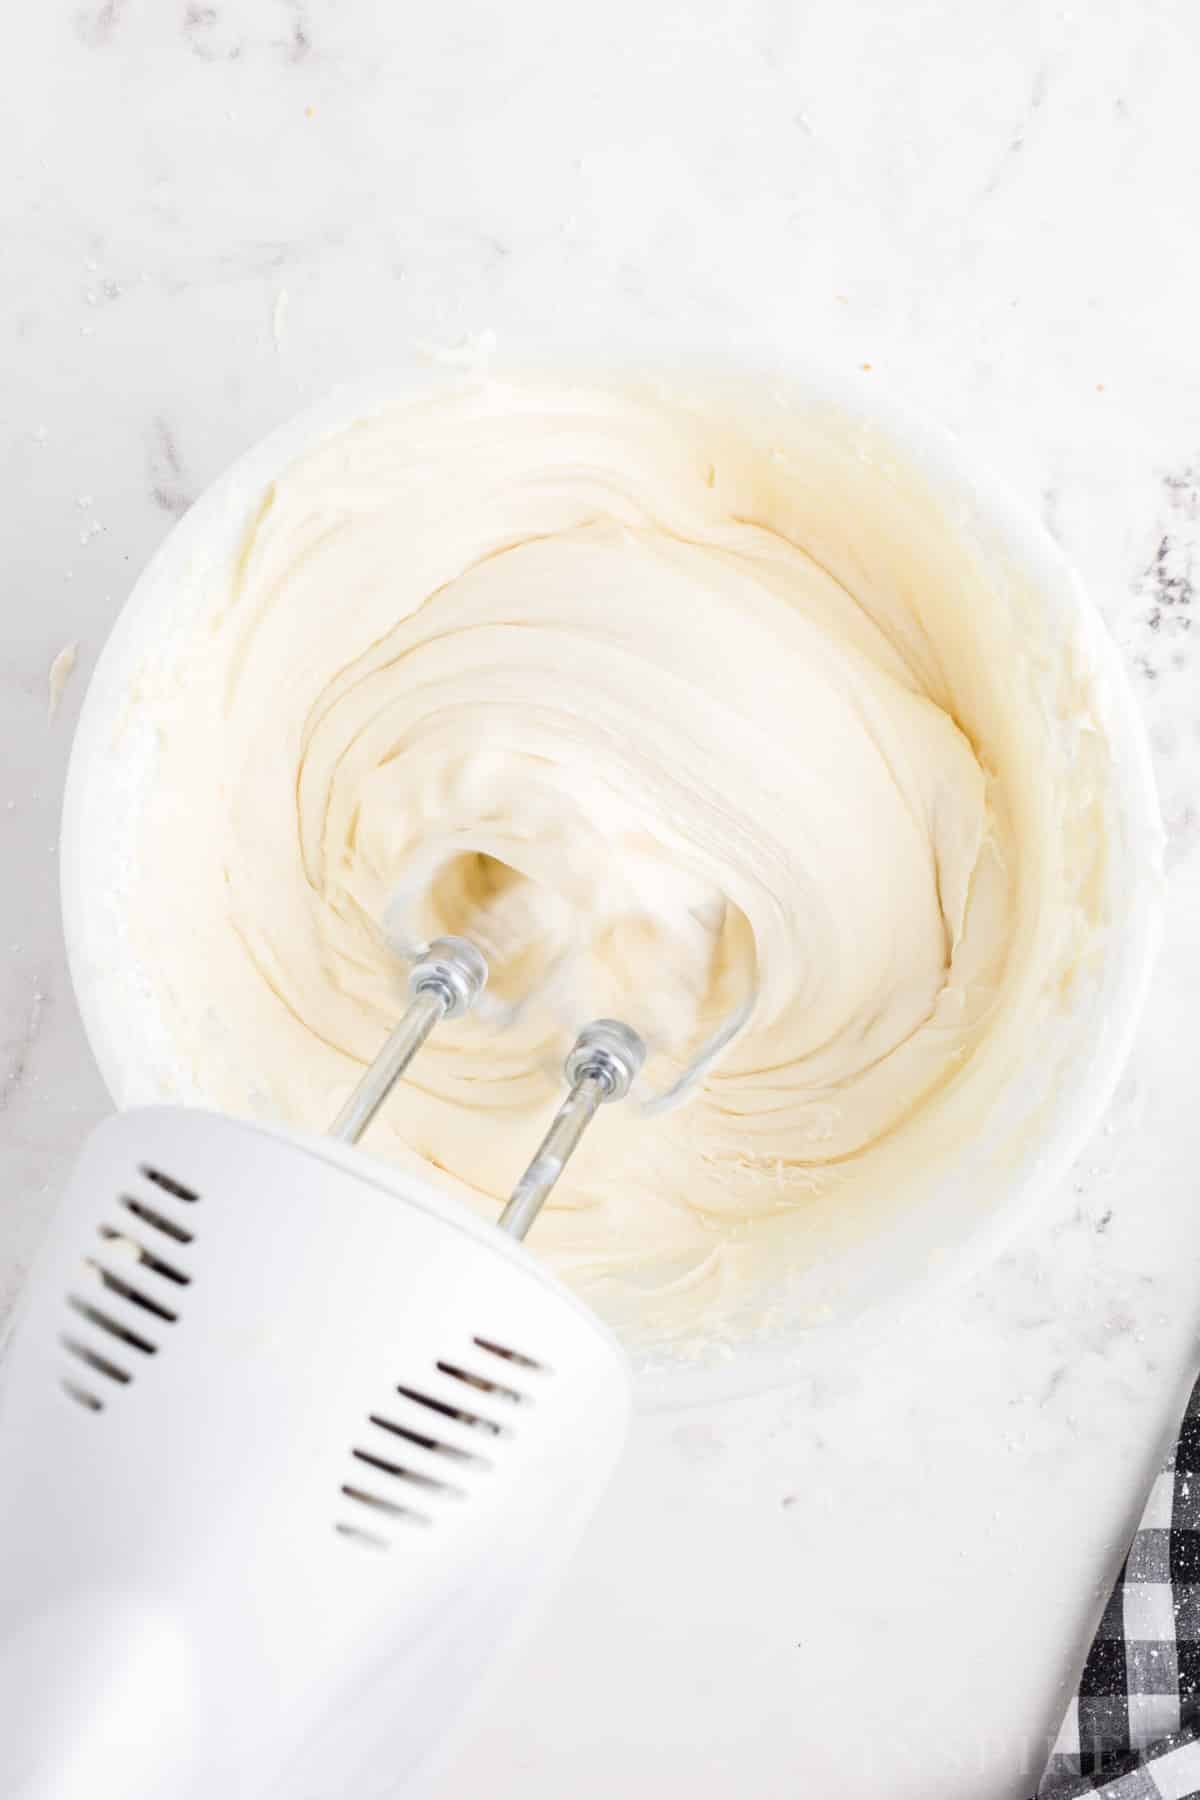 Electric mixer beating the cream cheese buttercream ingredients in a mixing bowl.